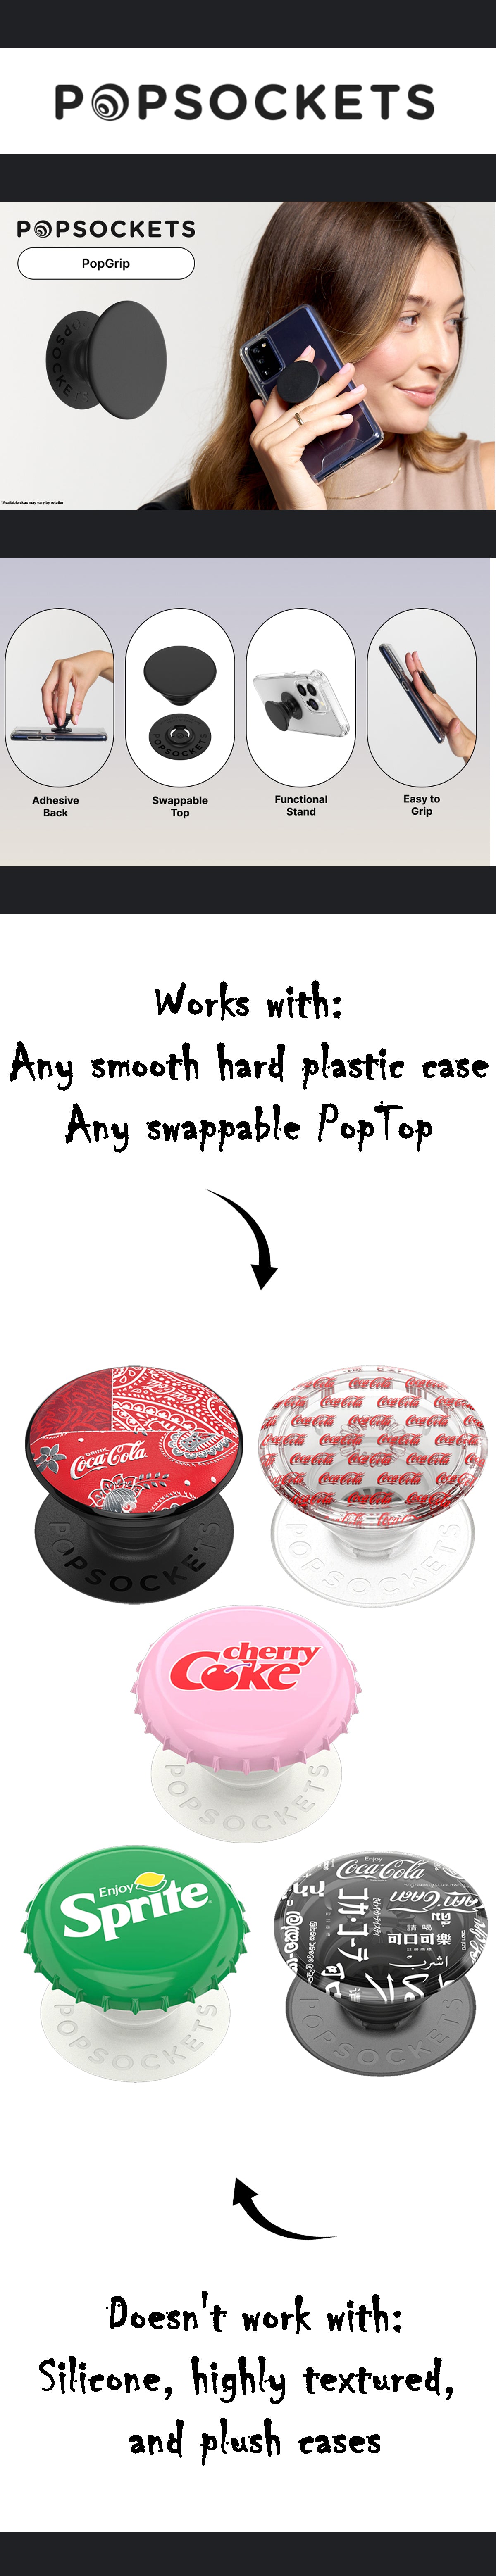 PopSockets Swappable Popgrip Licensed - Coca Cola / Sprite Series